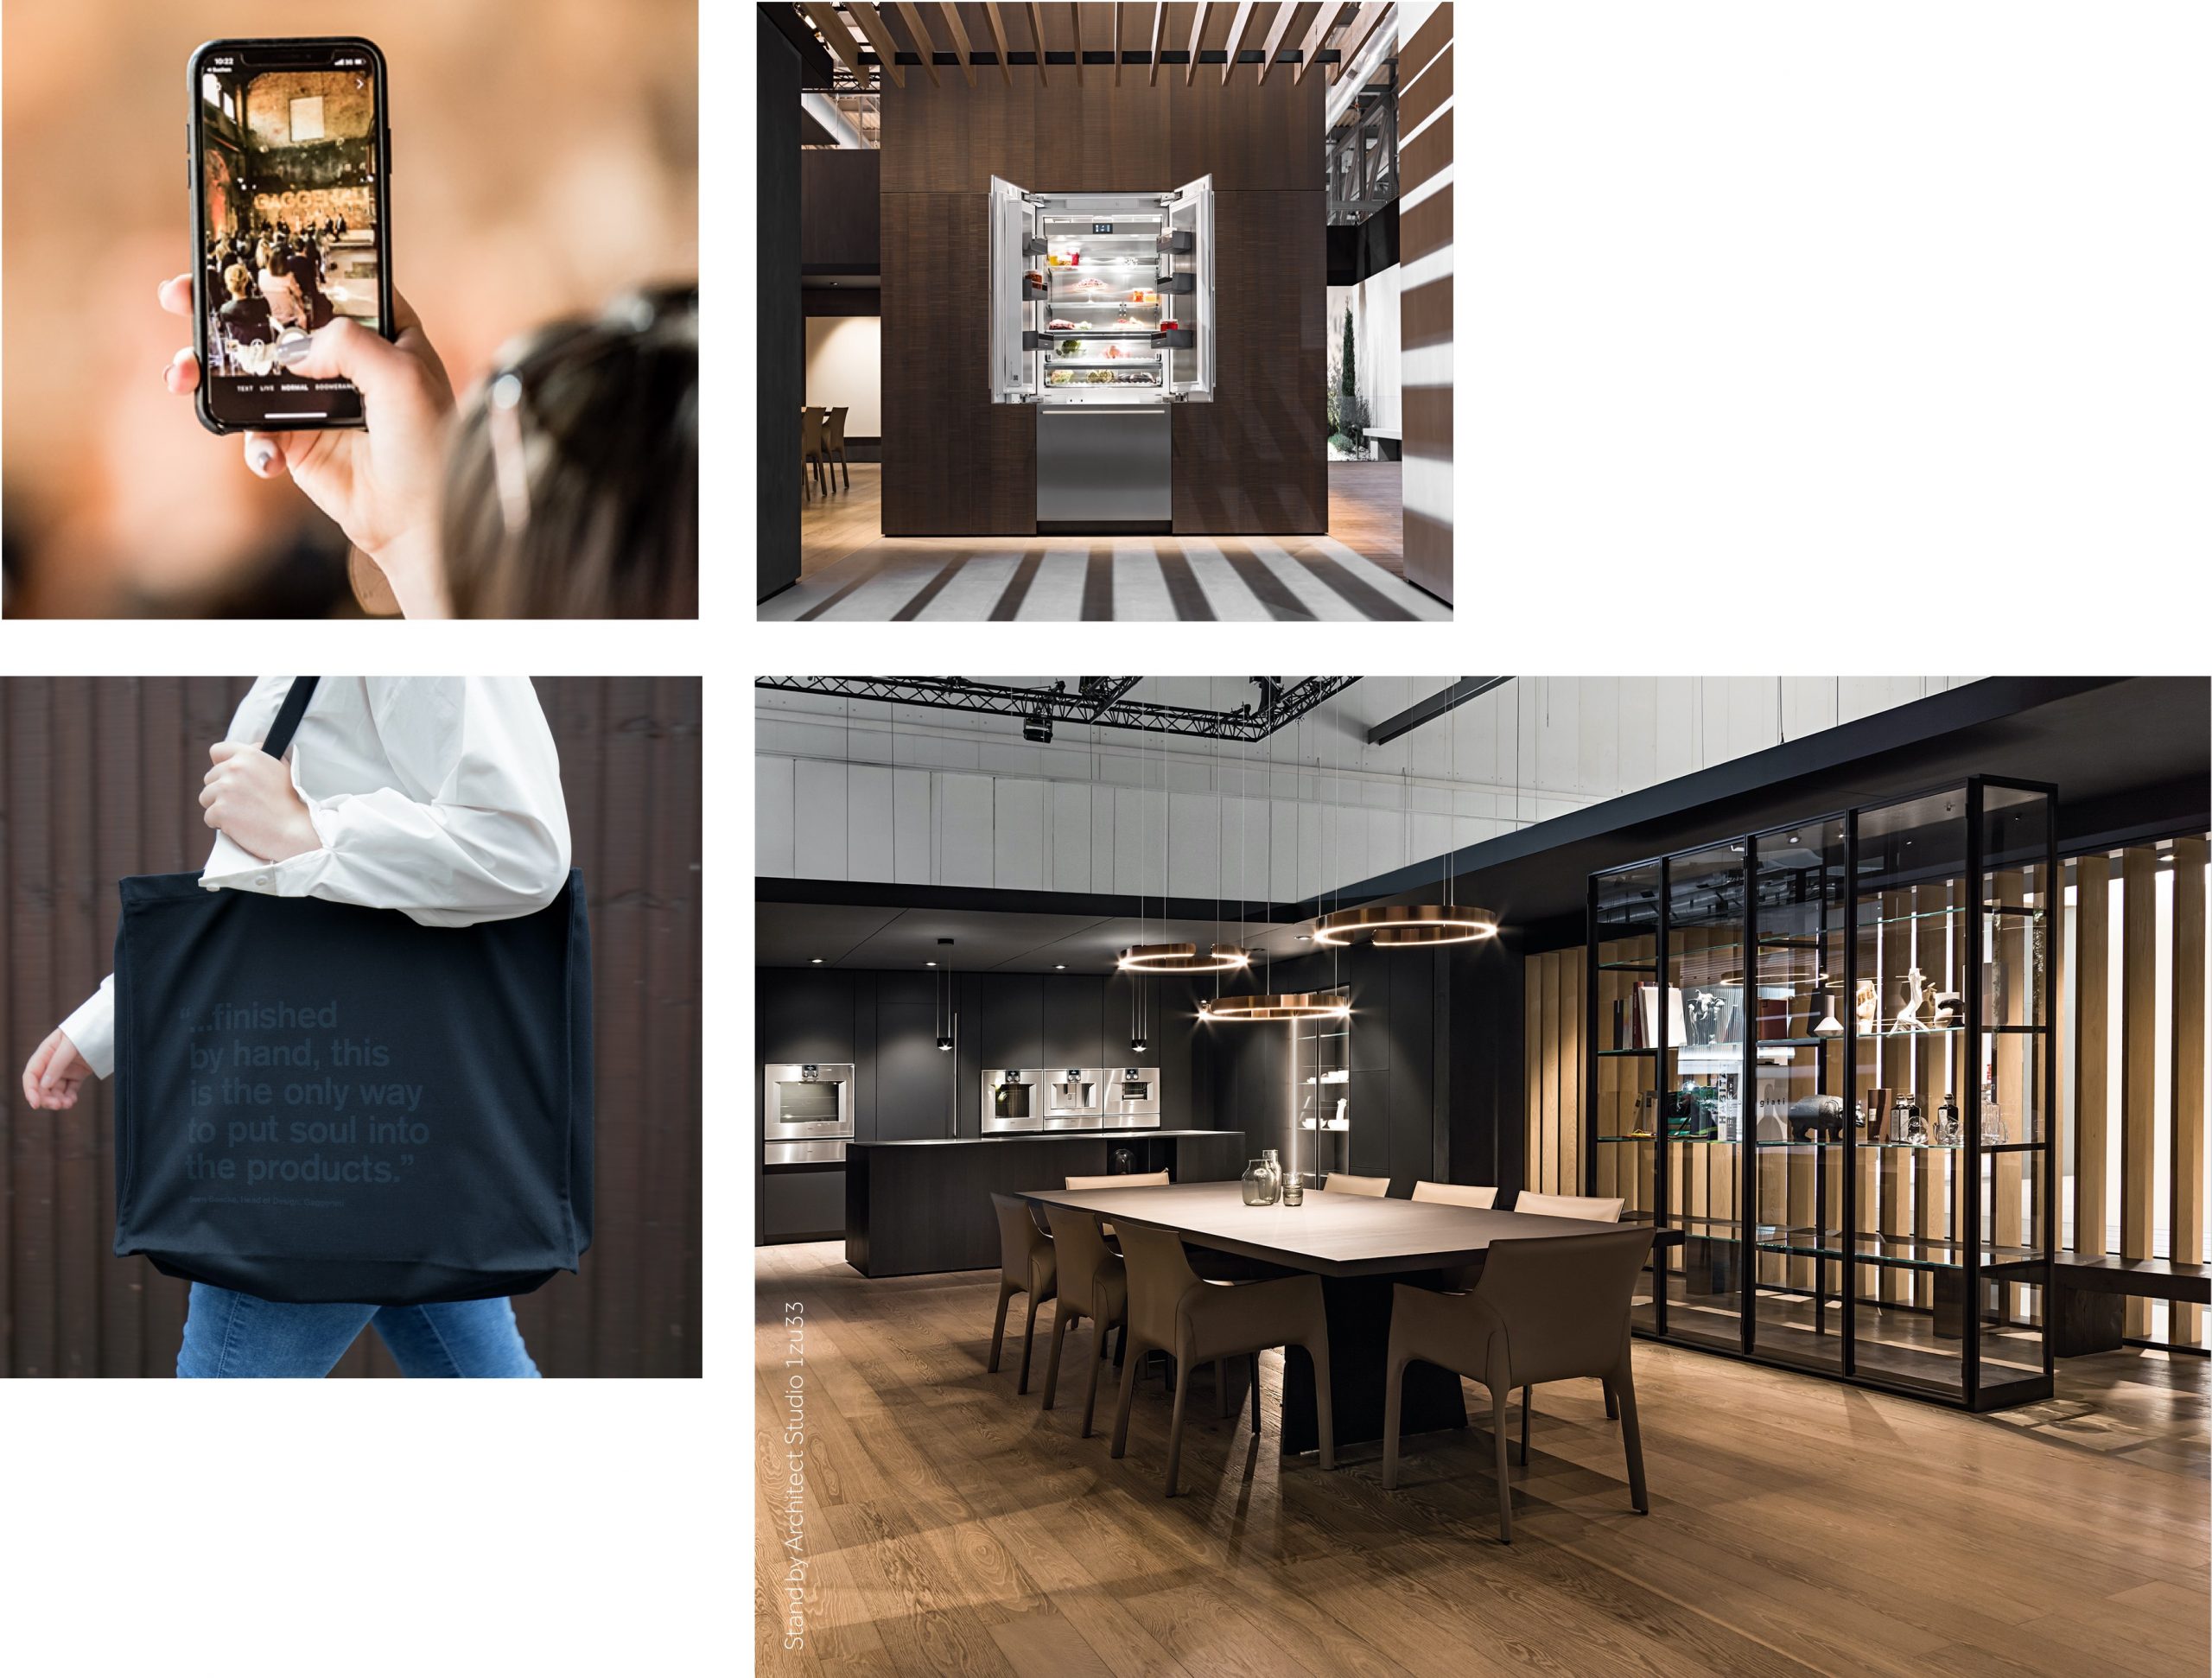 Gaggenau events: sharing discussion panels on social media, product trade shows, branded gifts, bags and collateral, partnerships with other brands at trade fairs and showrooms